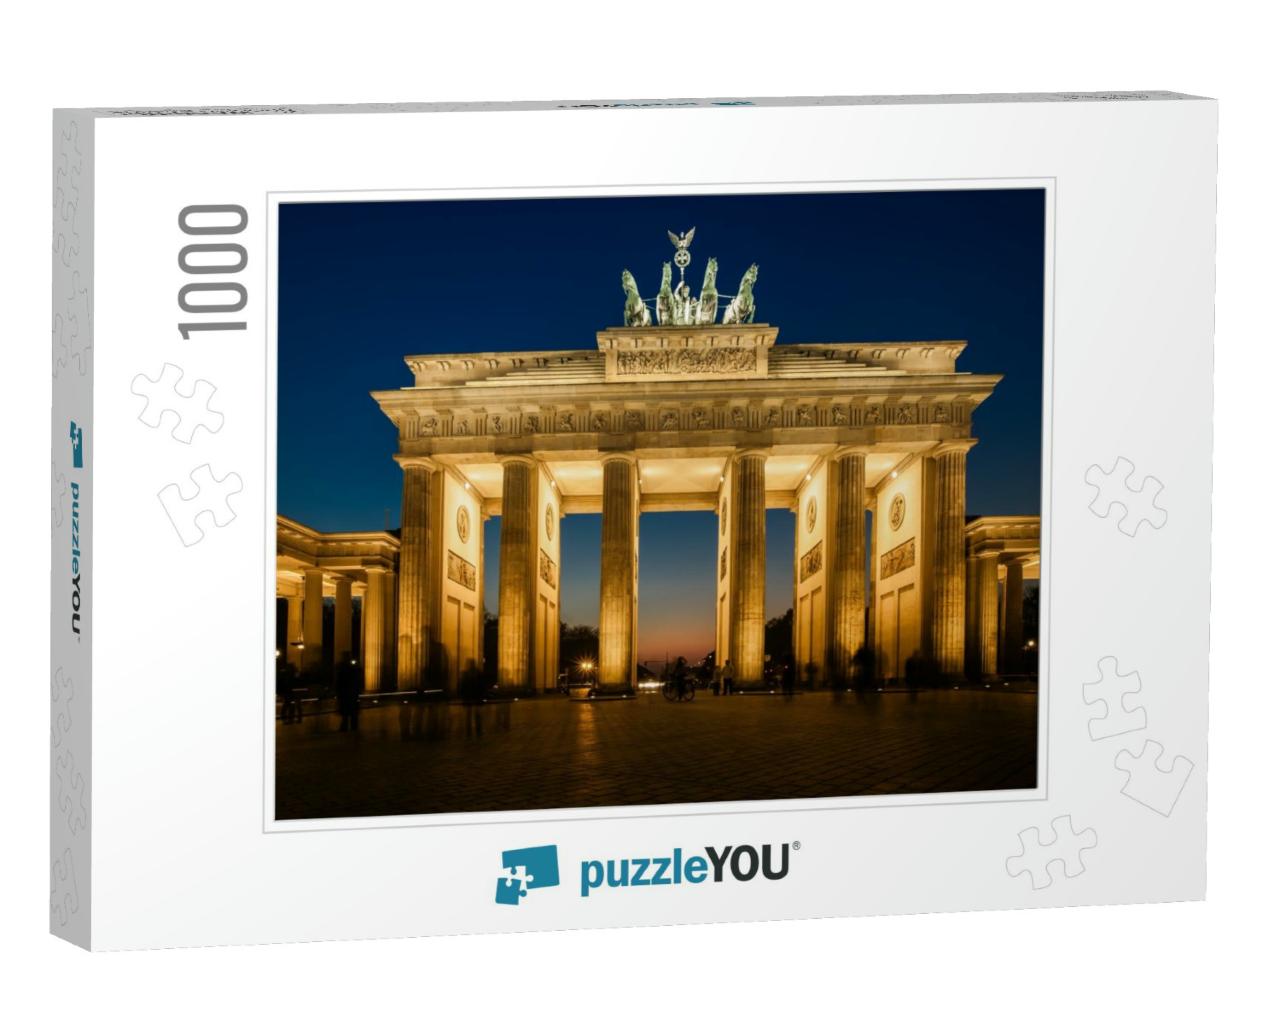 The Floodlit Brandenburg Gate in Berlin with a Few Fleeti... Jigsaw Puzzle with 1000 pieces